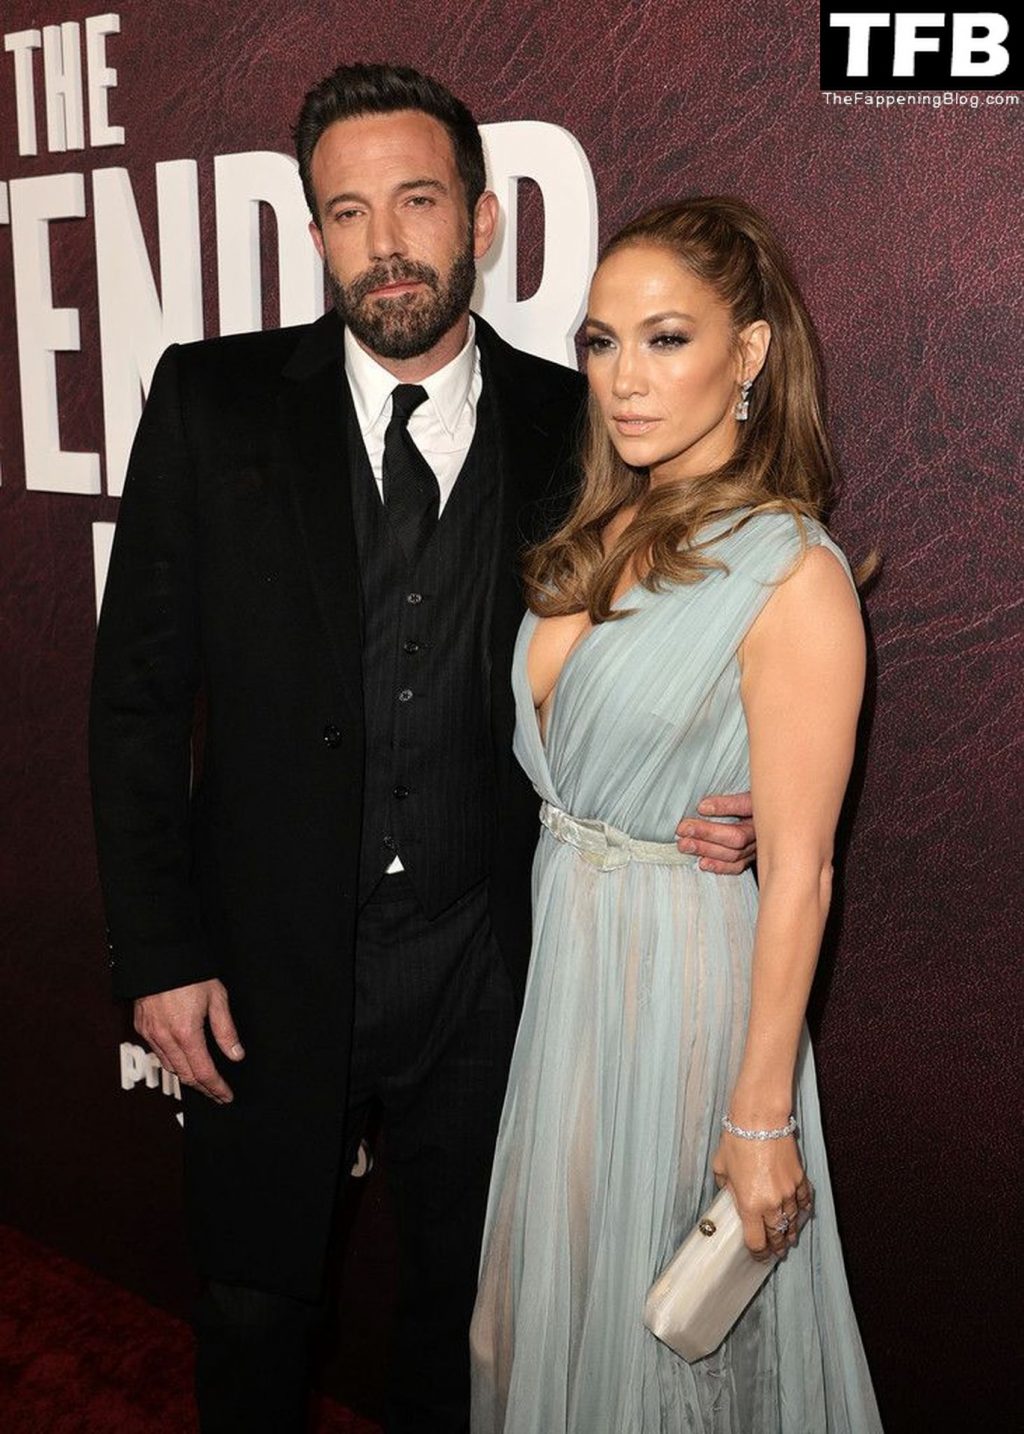 Jennifer Lopez Flaunts Her Deep Cleavage at the Premiere of ‘The Tender Bar’ in LA (21 Photos)